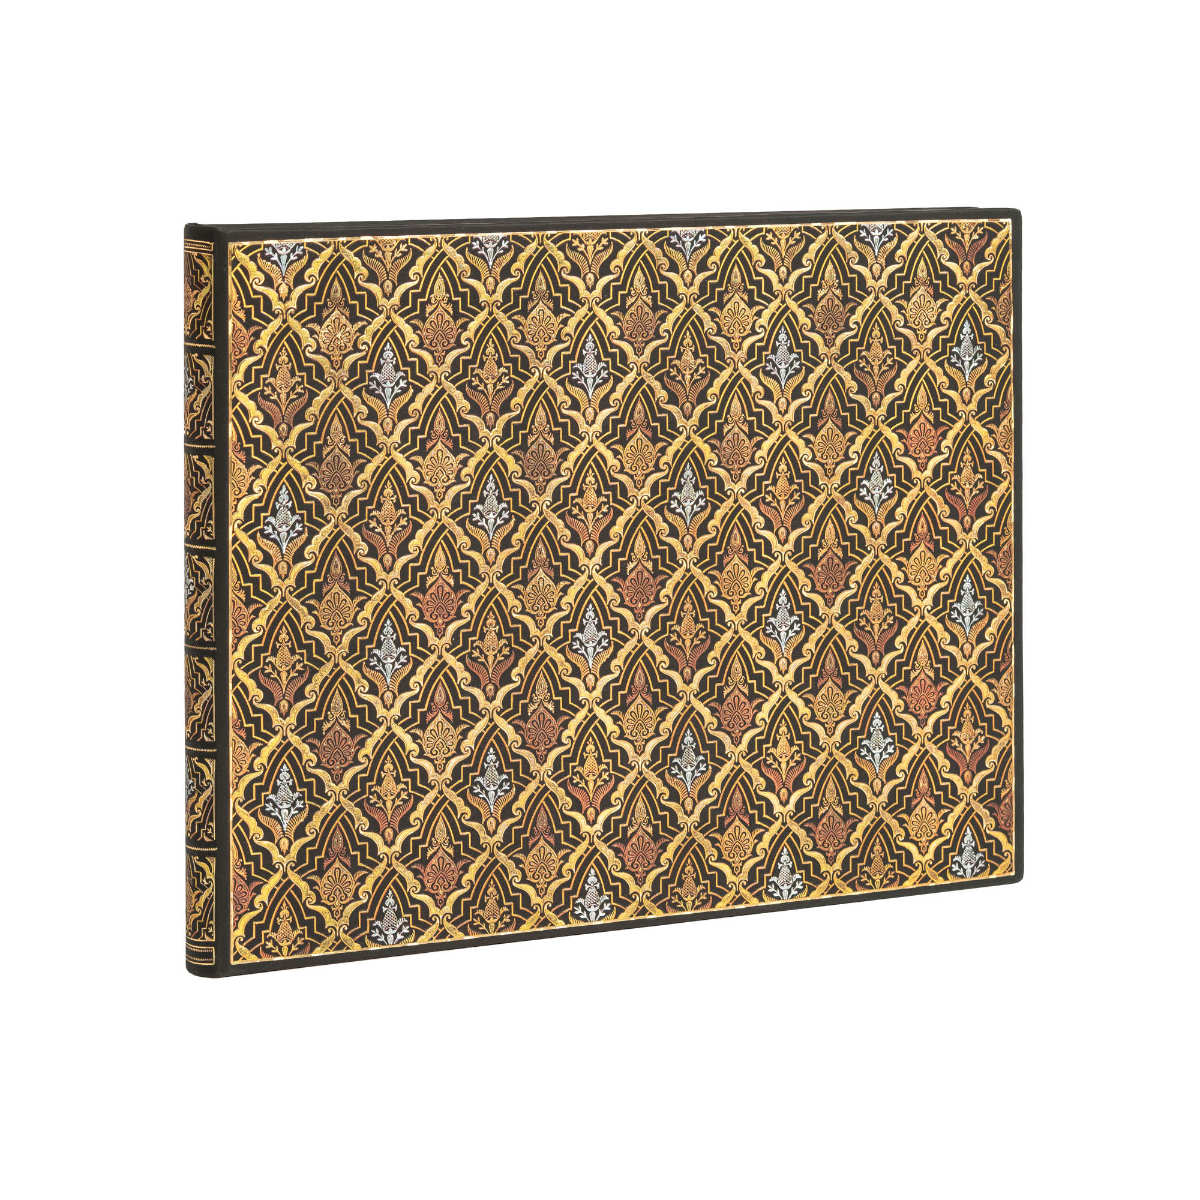 Paperblanks Voltaire Destiny 9 x 7 Inch Guest Book